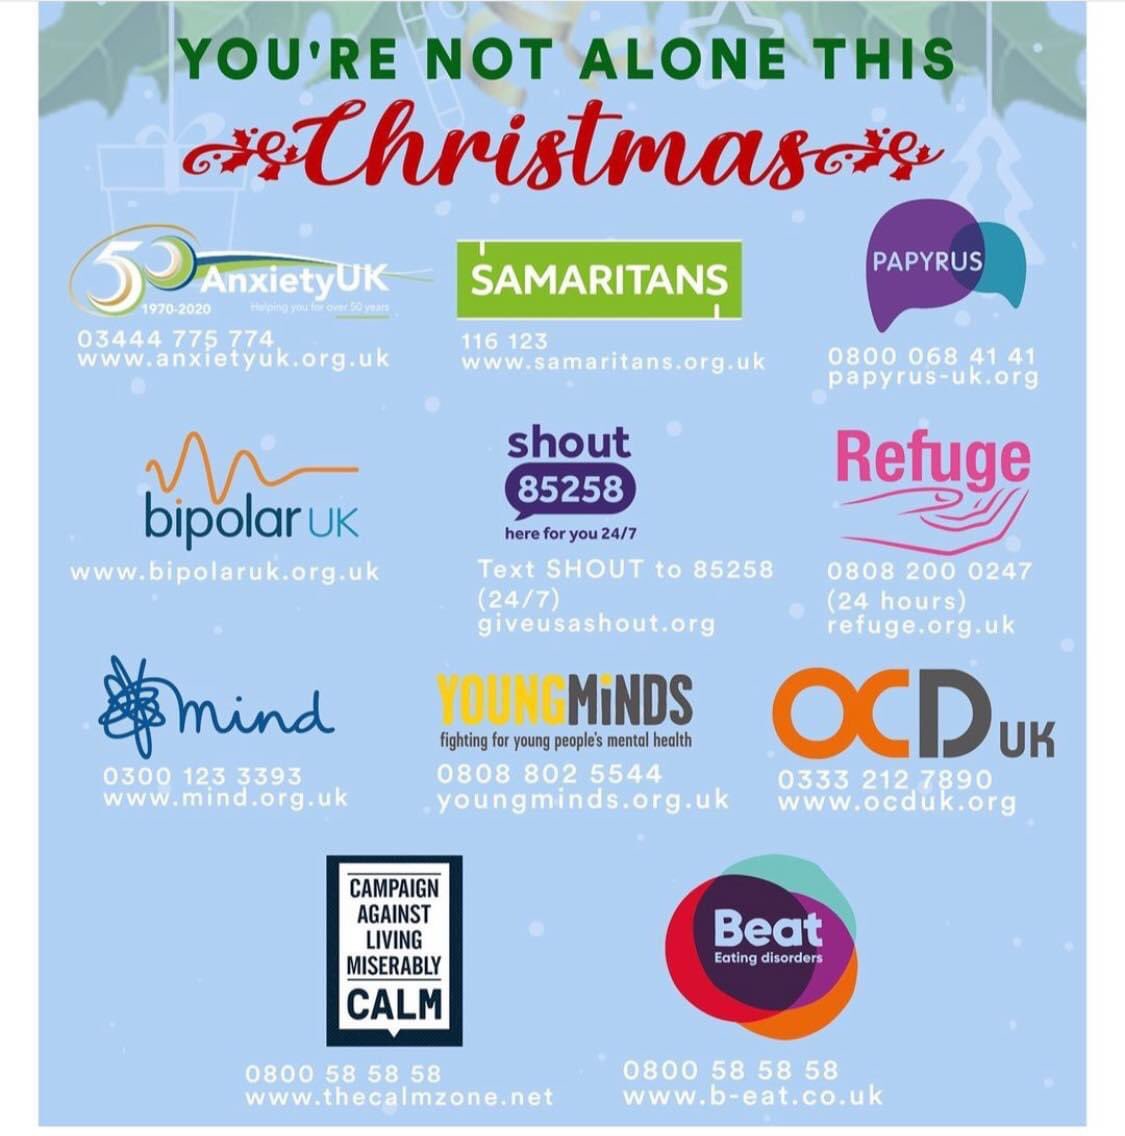 As most of the UK are now in a third lockdown and for many plans, with family and friends have had to change - Remember you are not alone and there are so many who want to help and support you @ArmyCadetsHQ @CFHealthyMinds @ACFStepChange @ACFColCadets @ACF_LGBT @ArmyCdtsINSPIRE